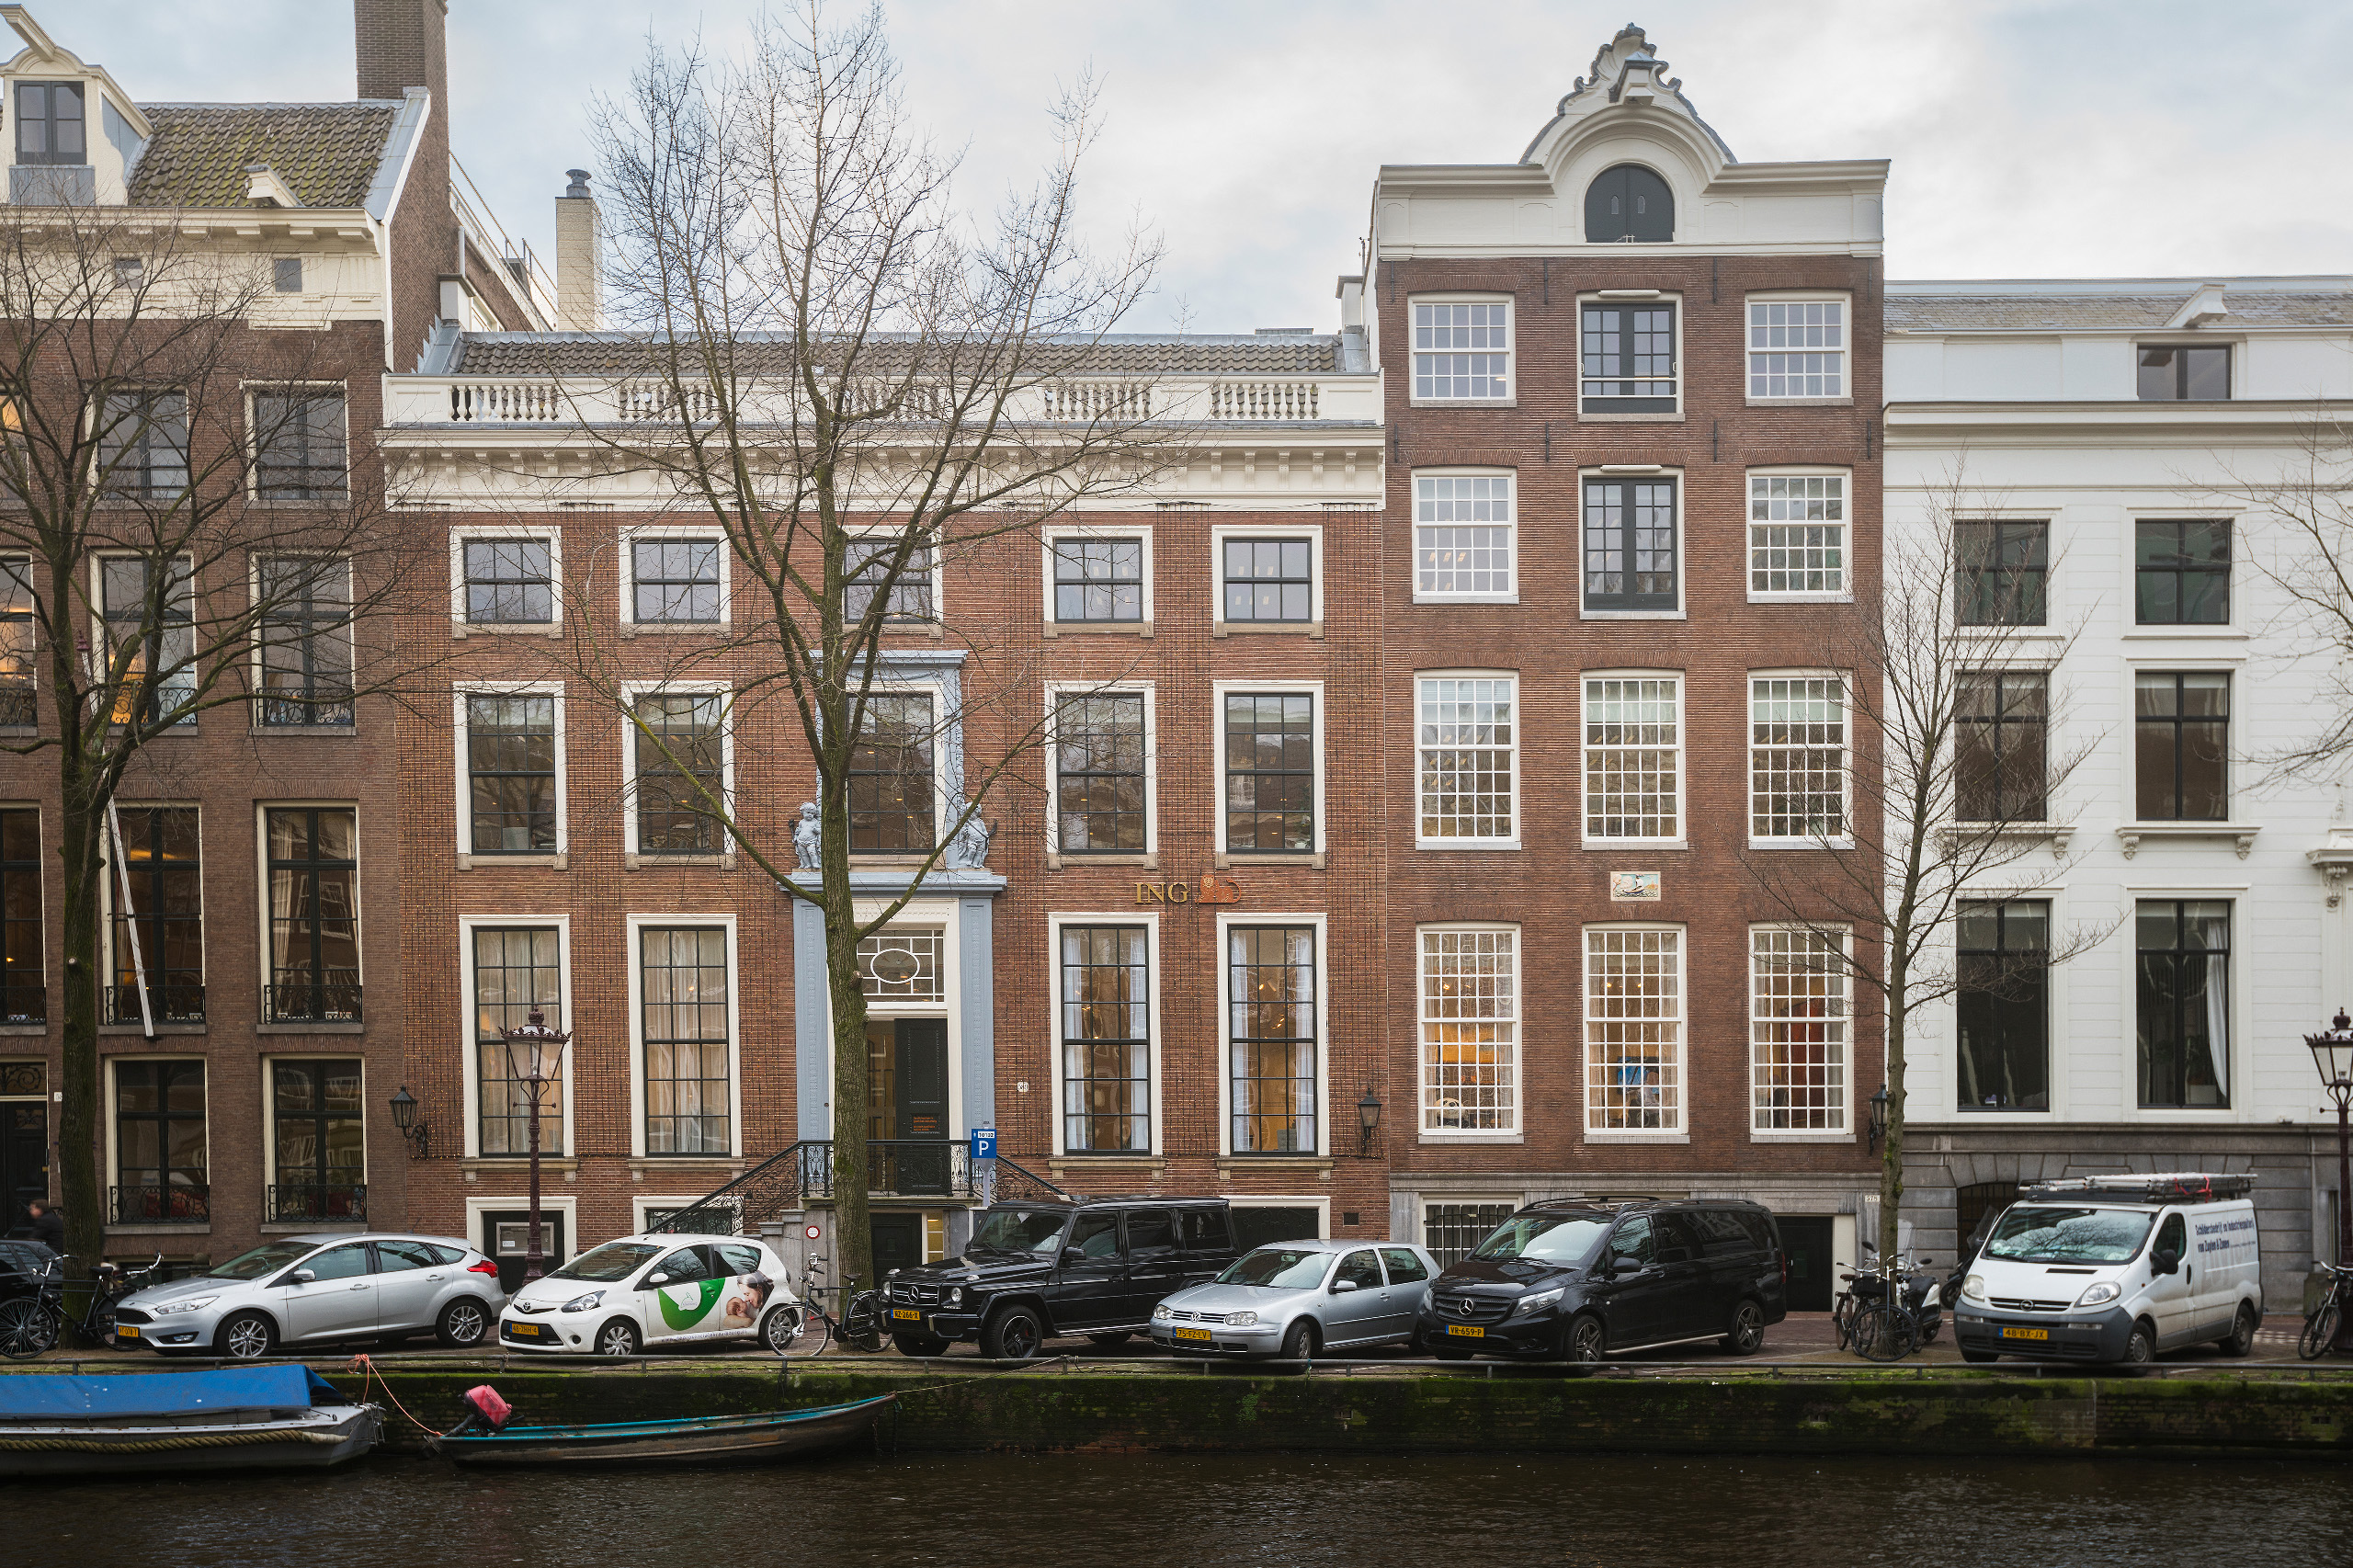 Herengracht monumental canal houses